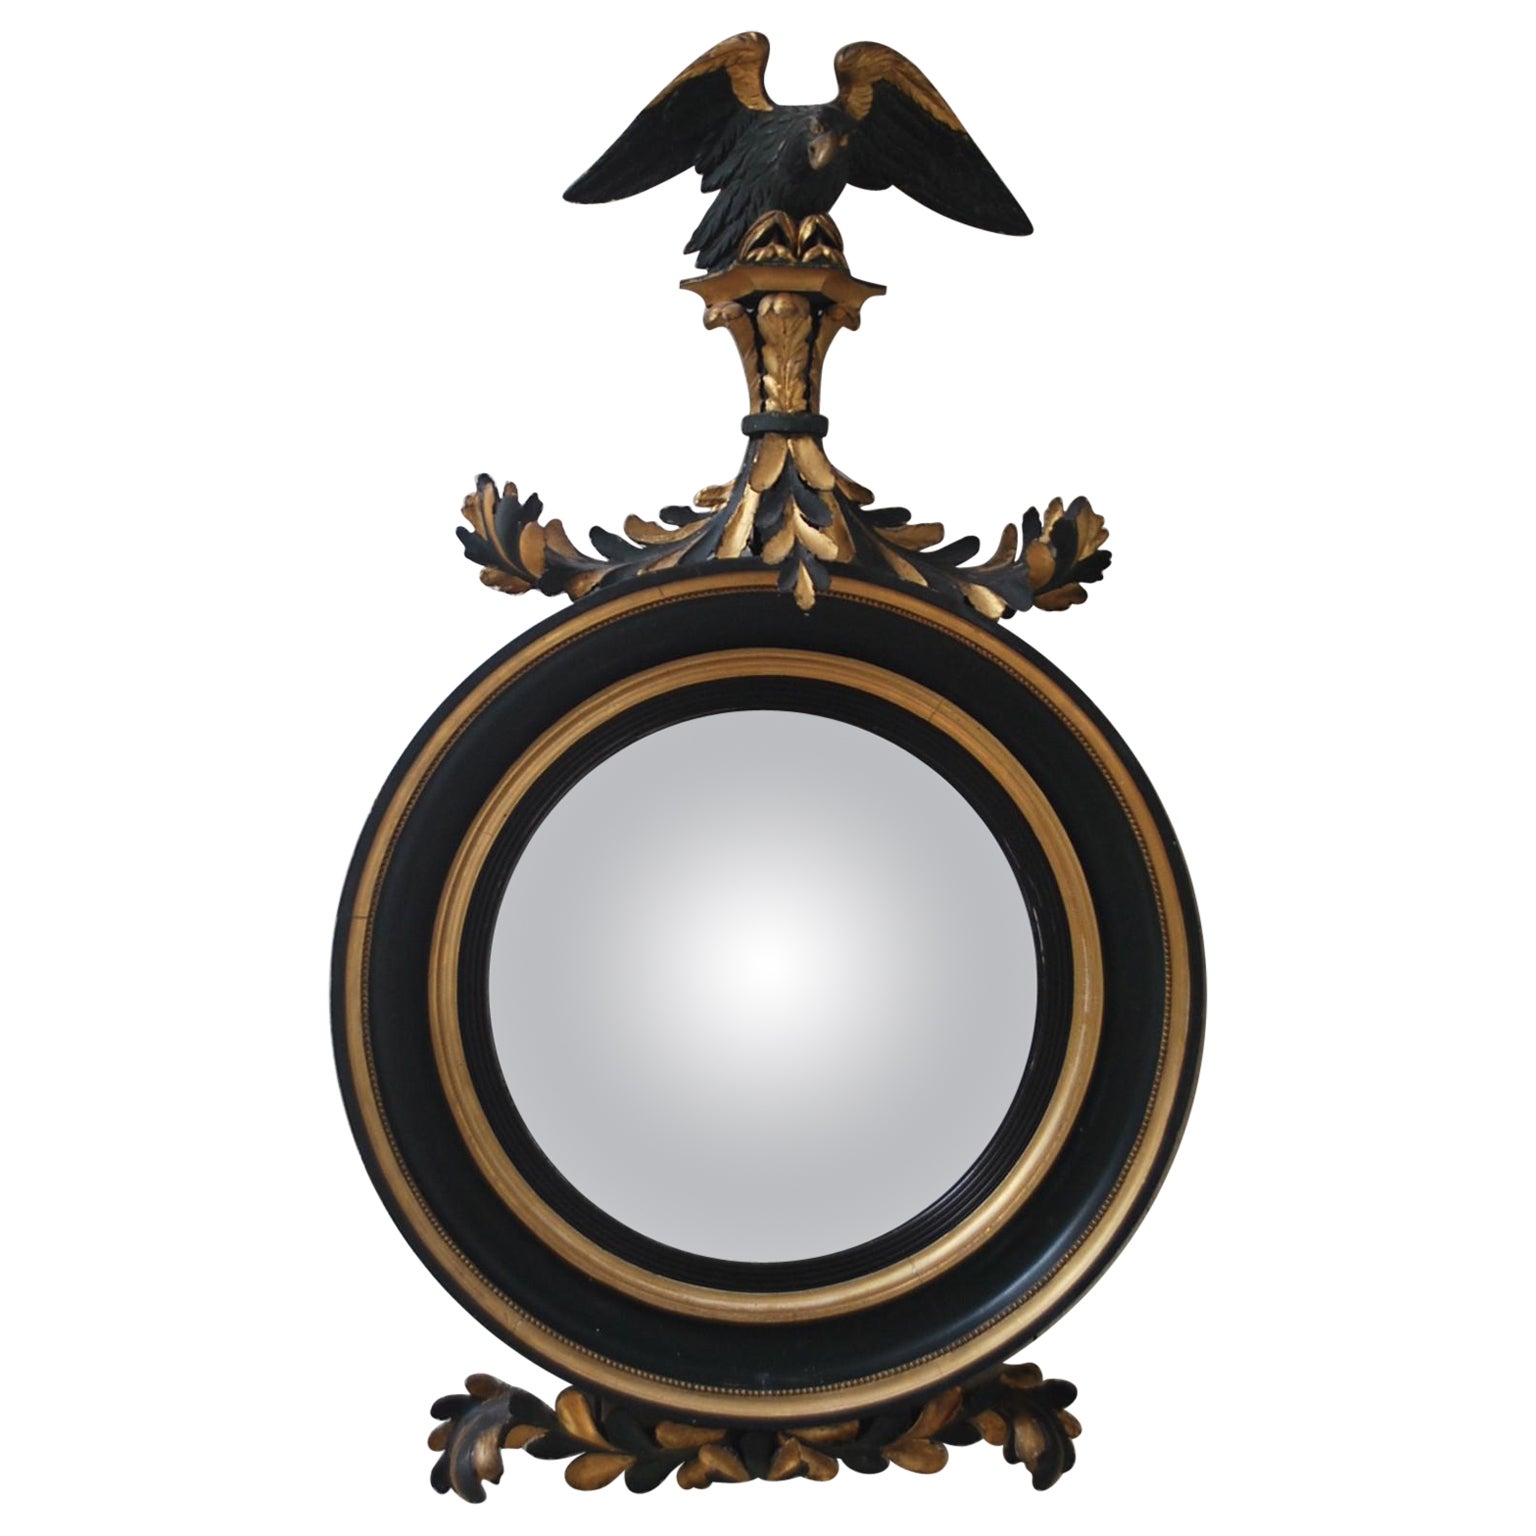 Giltwood and Painted Convex Mirror